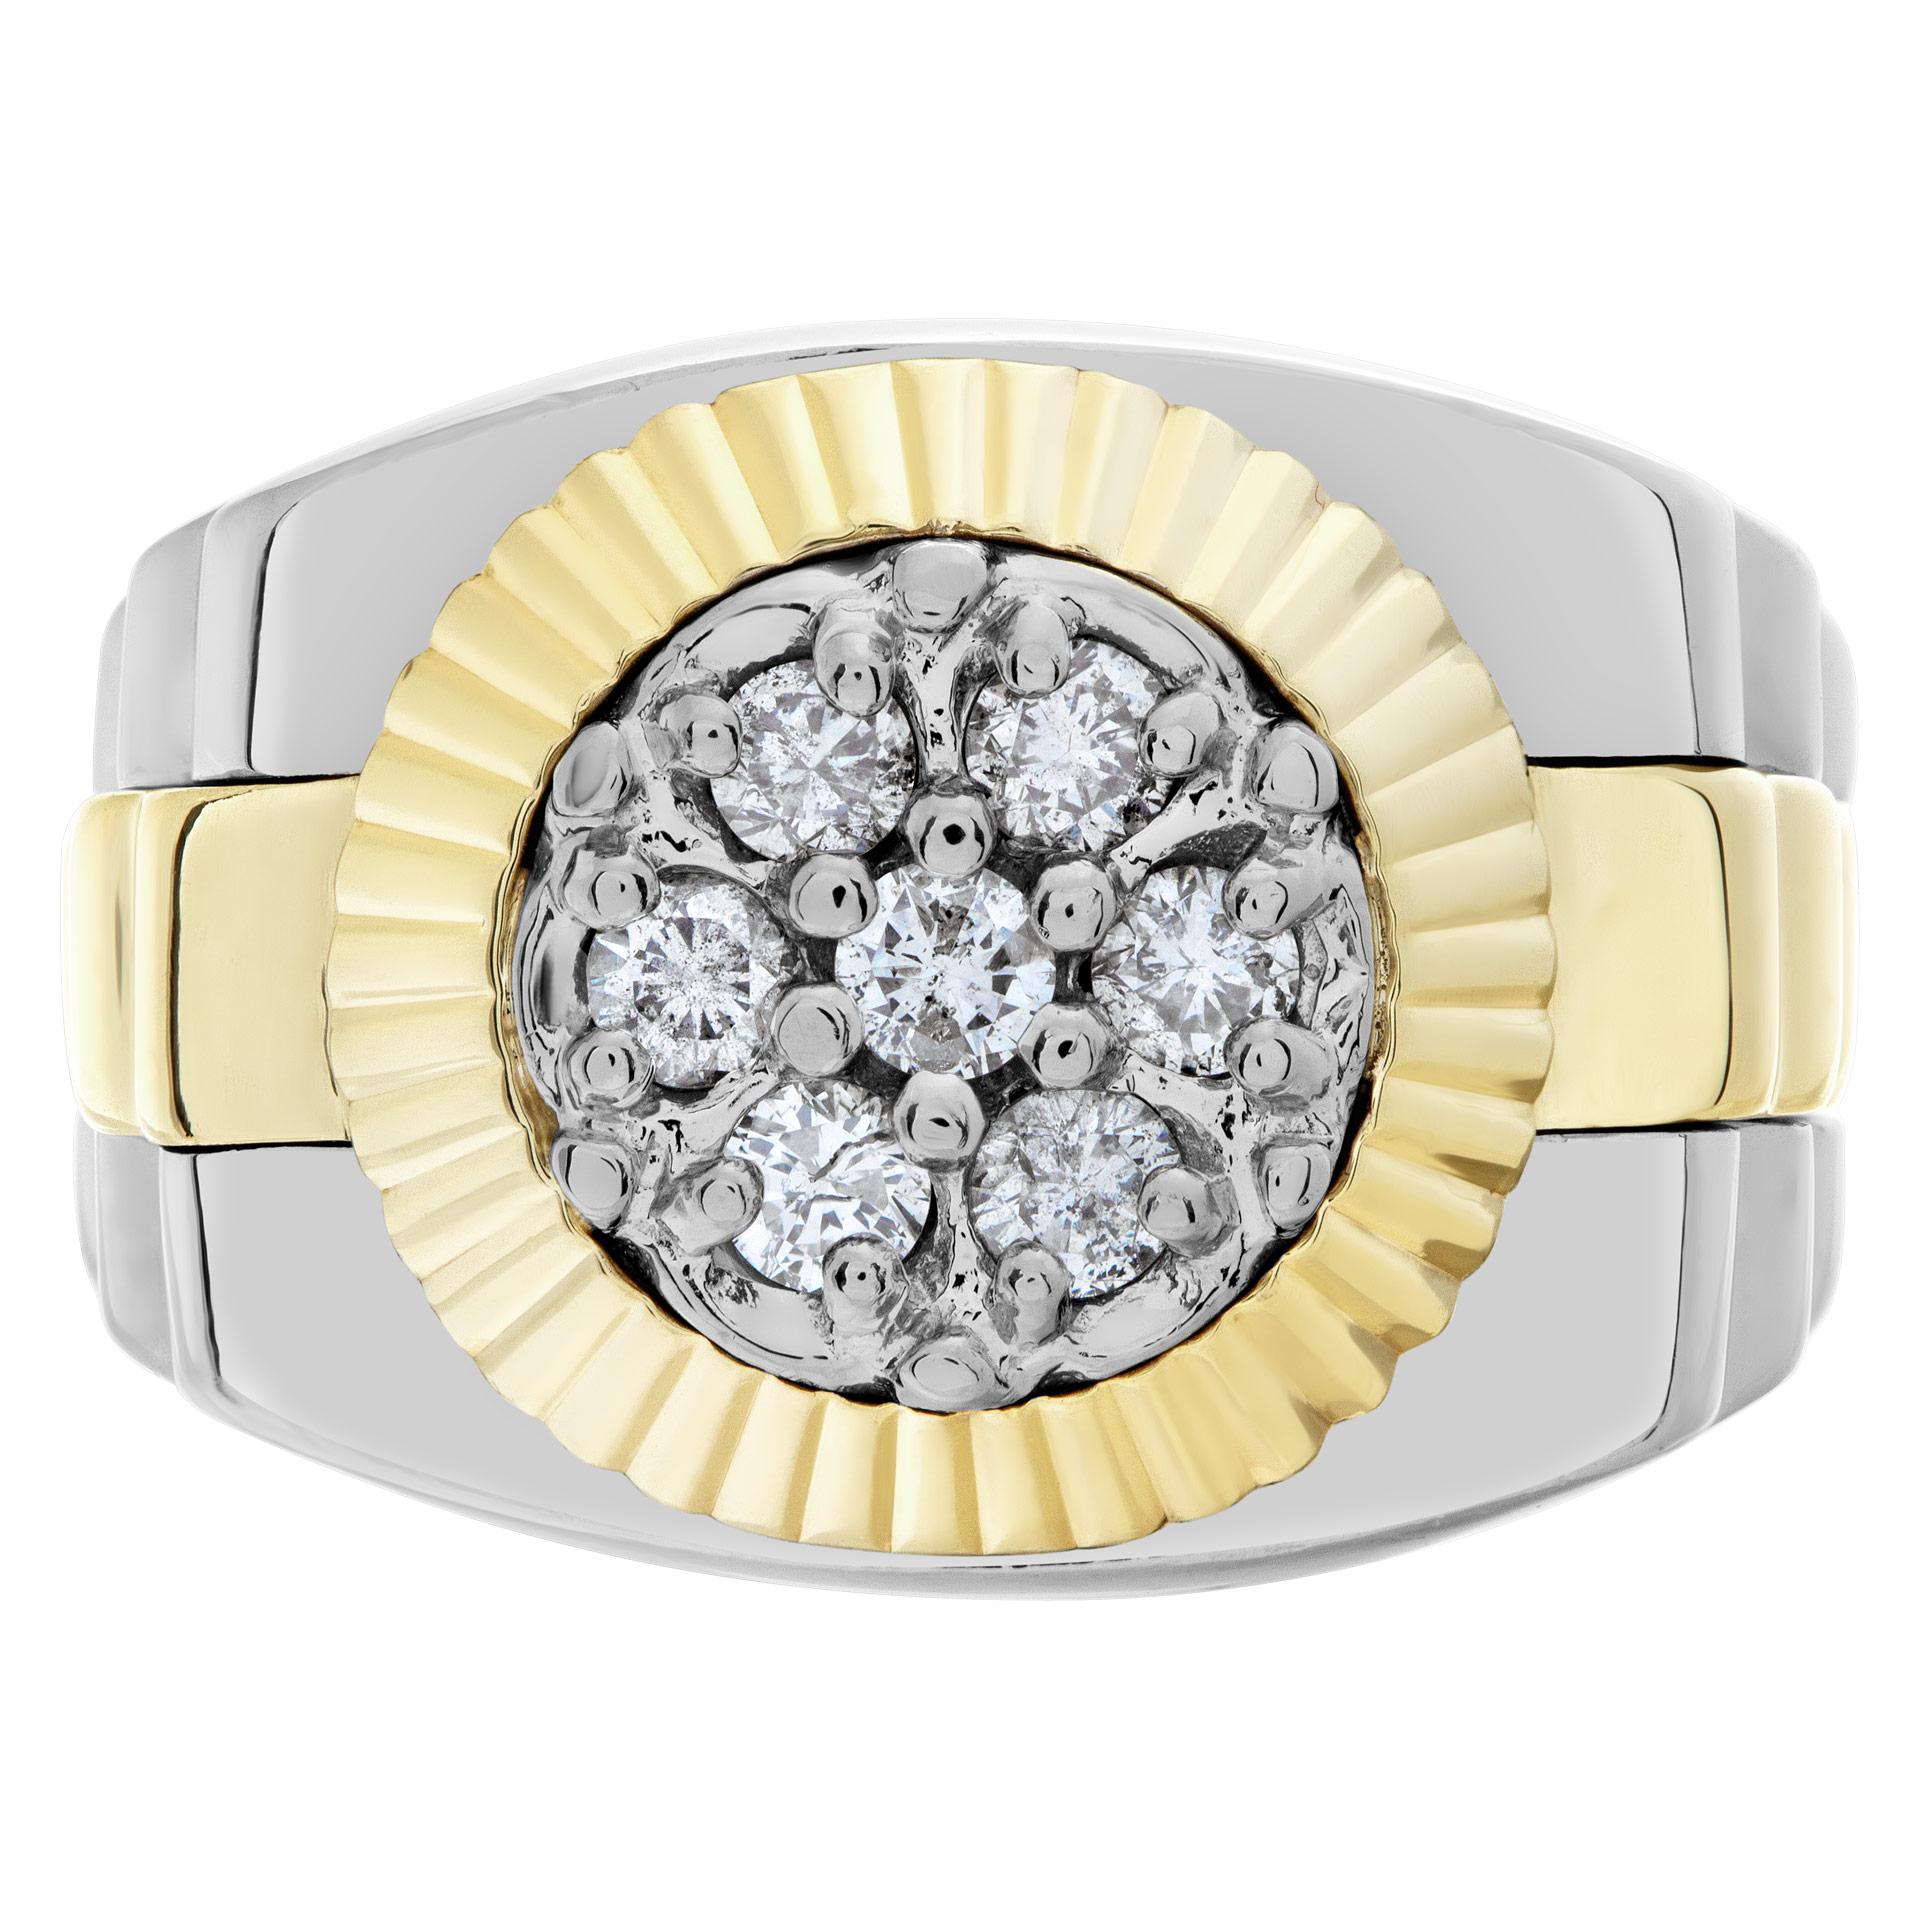 President style diamond ring in 14k white and yellow gold. Round brilliant cut diamonds total approx. weight: 0.35 carat, estimate: G-H color- VS/SI clarity. Ring size 8  This Diamond ring is currently size 8 and some items can be sized up or down,